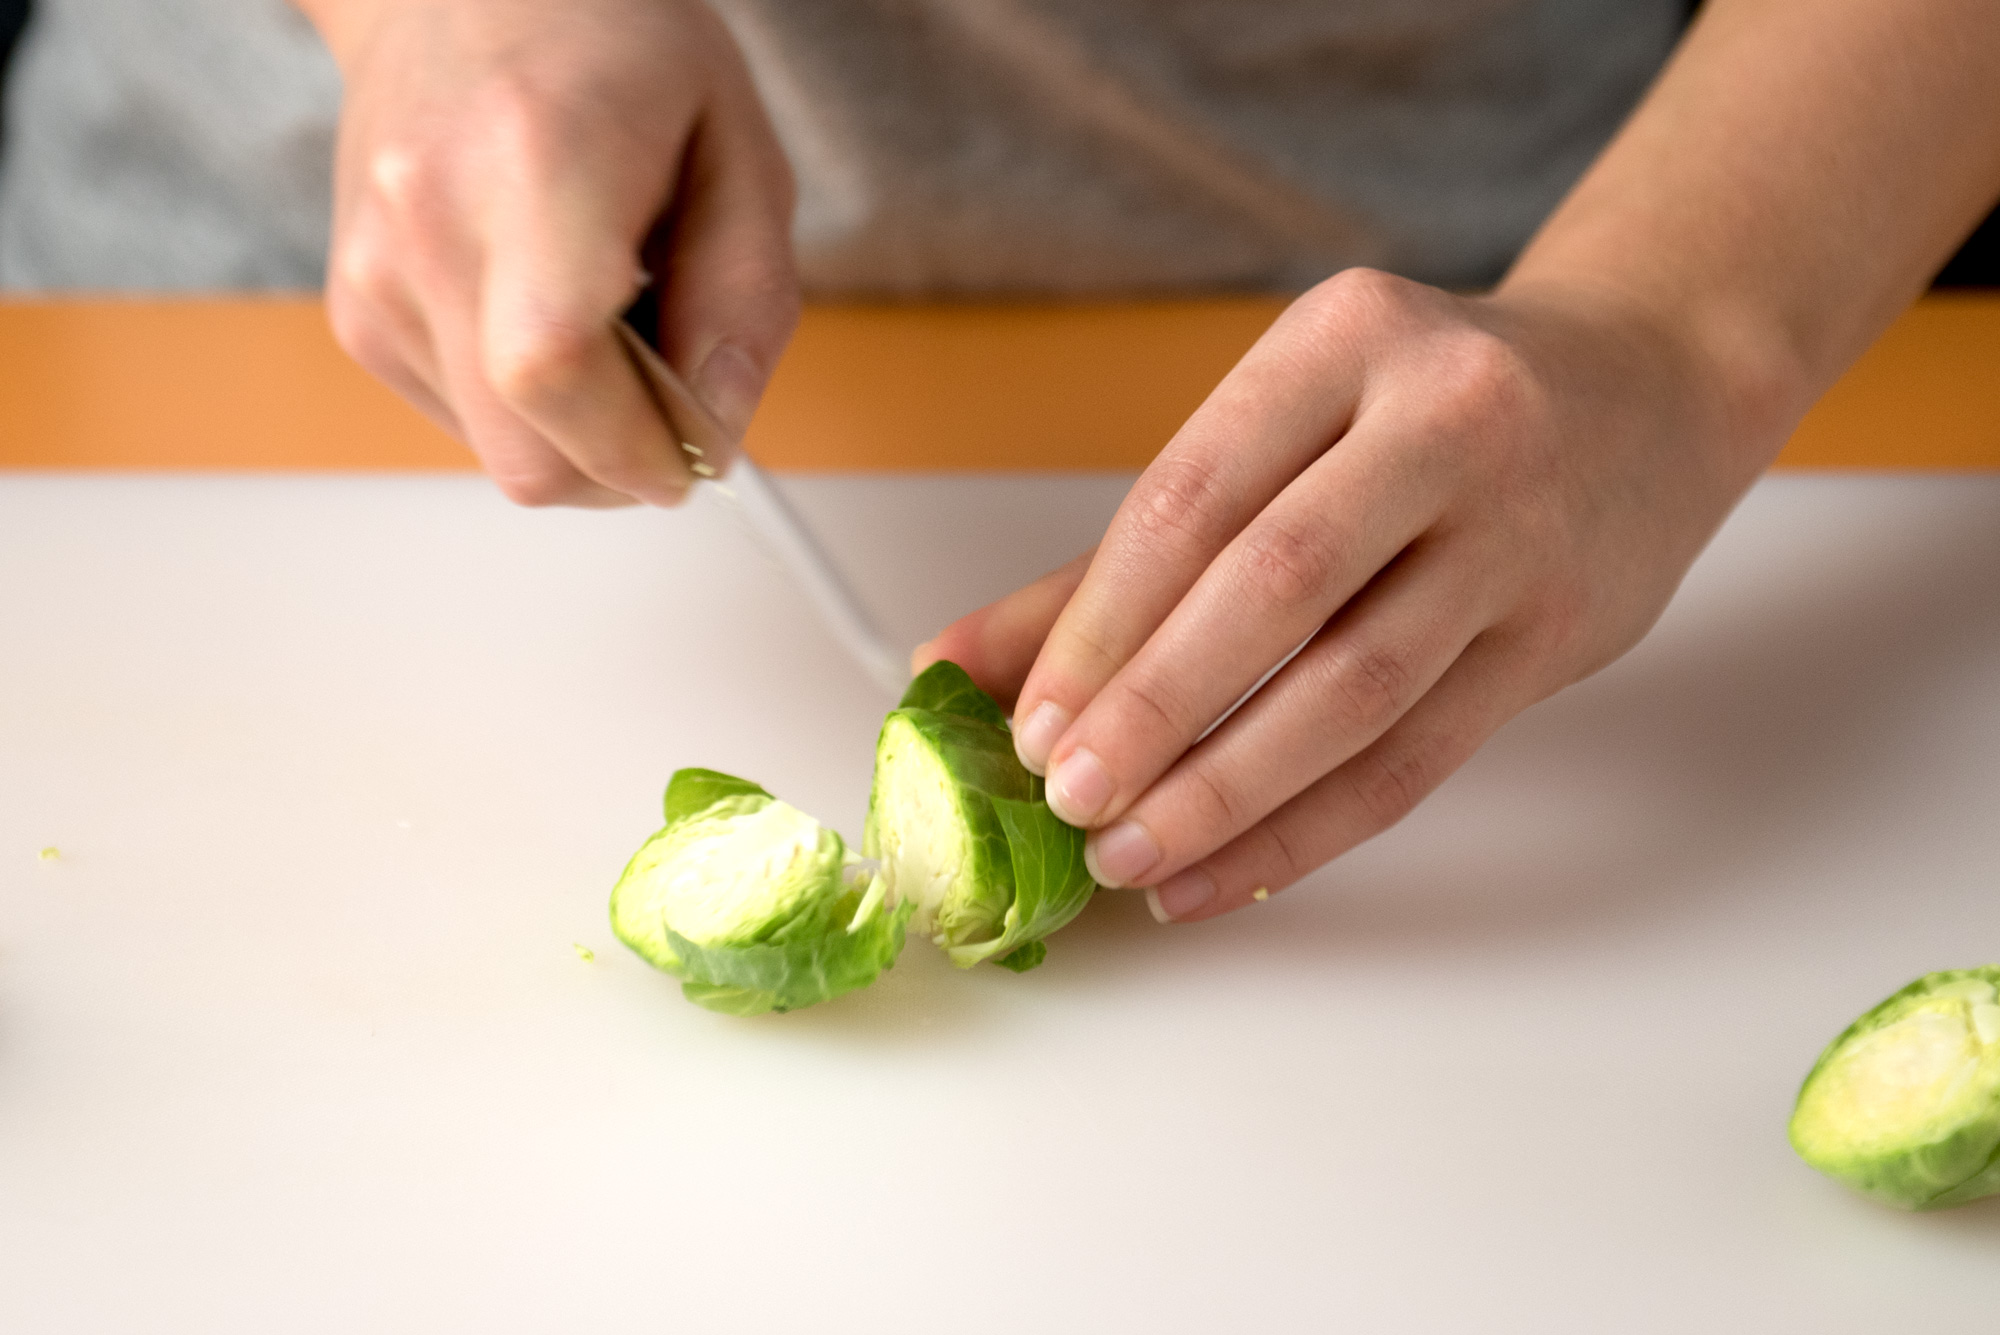 A woman cutting brussels sprouts.